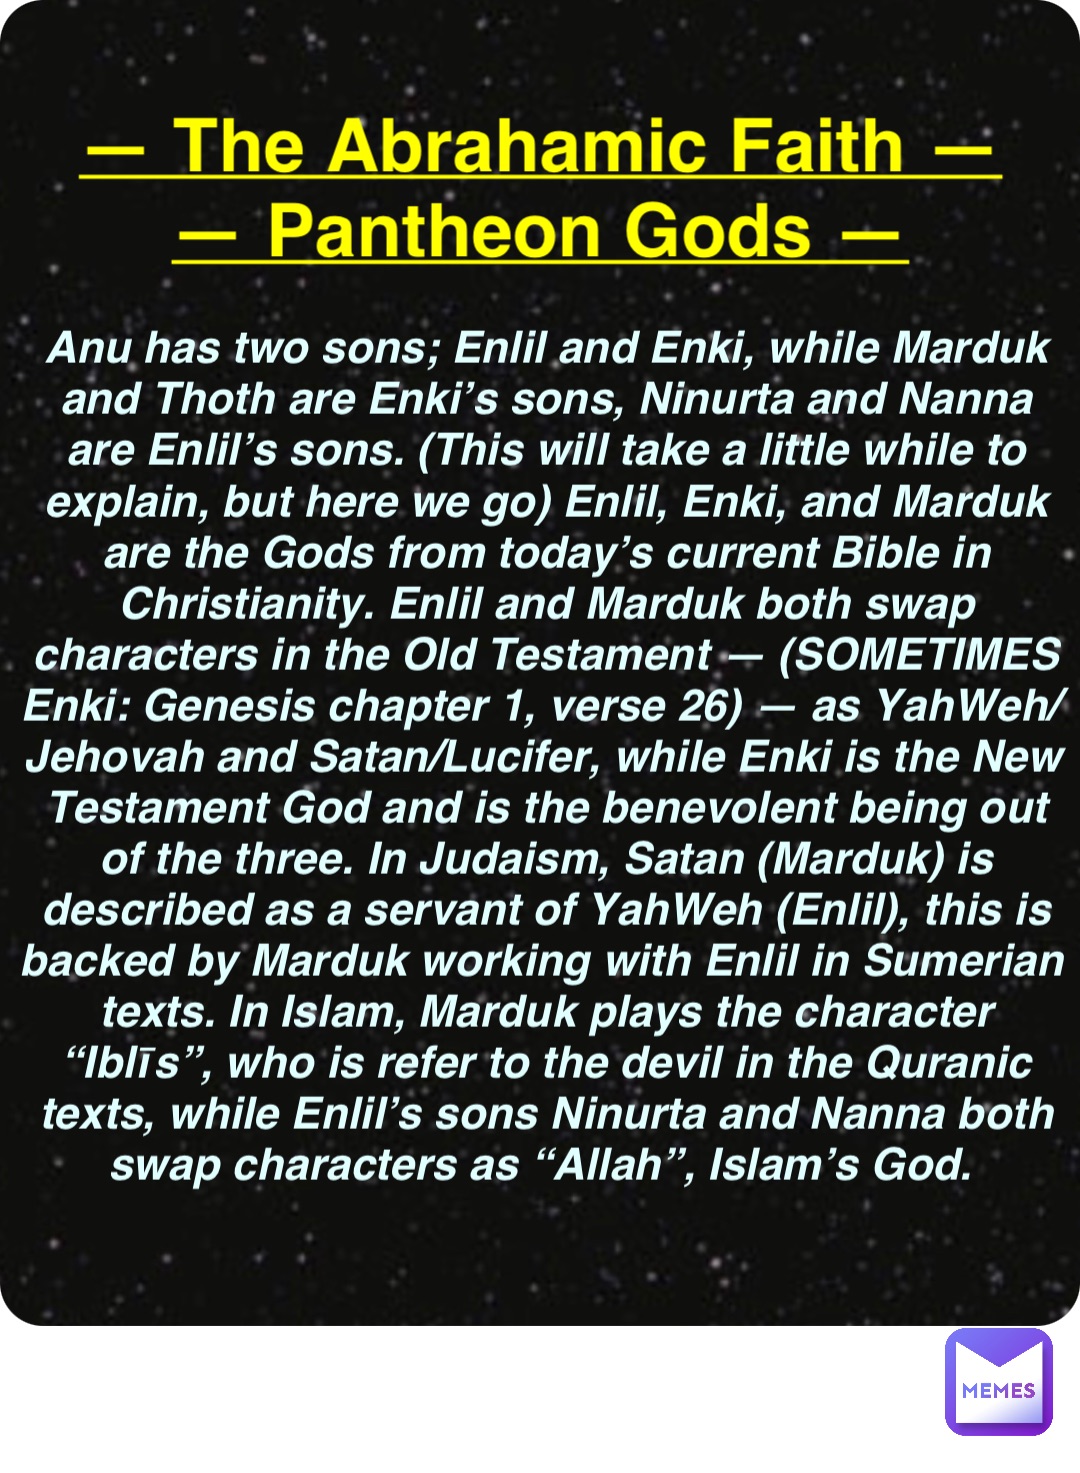 Double tap to edit — The Abrahamic Faith —
— Pantheon Gods — Anu has two sons; Enlil and Enki, while Marduk and Thoth are Enki’s sons, Ninurta and Nanna are Enlil’s sons. (This will take a little while to explain, but here we go) Enlil, Enki, and Marduk are the Gods from today’s current Bible in Christianity. Enlil and Marduk both swap characters in the Old Testament — (SOMETIMES Enki: Genesis chapter 1, verse 26) — as YahWeh/Jehovah and Satan/Lucifer, while Enki is the New Testament God and is the benevolent being out of the three. In Judaism, Satan (Marduk) is described as a servant of YahWeh (Enlil), this is backed by Marduk working with Enlil in Sumerian texts. In Islam, Marduk plays the character “Iblīs”, who is refer to the devil in the Quranic texts, while Enlil’s sons Ninurta and Nanna both swap characters as “Allah”, Islam’s God.